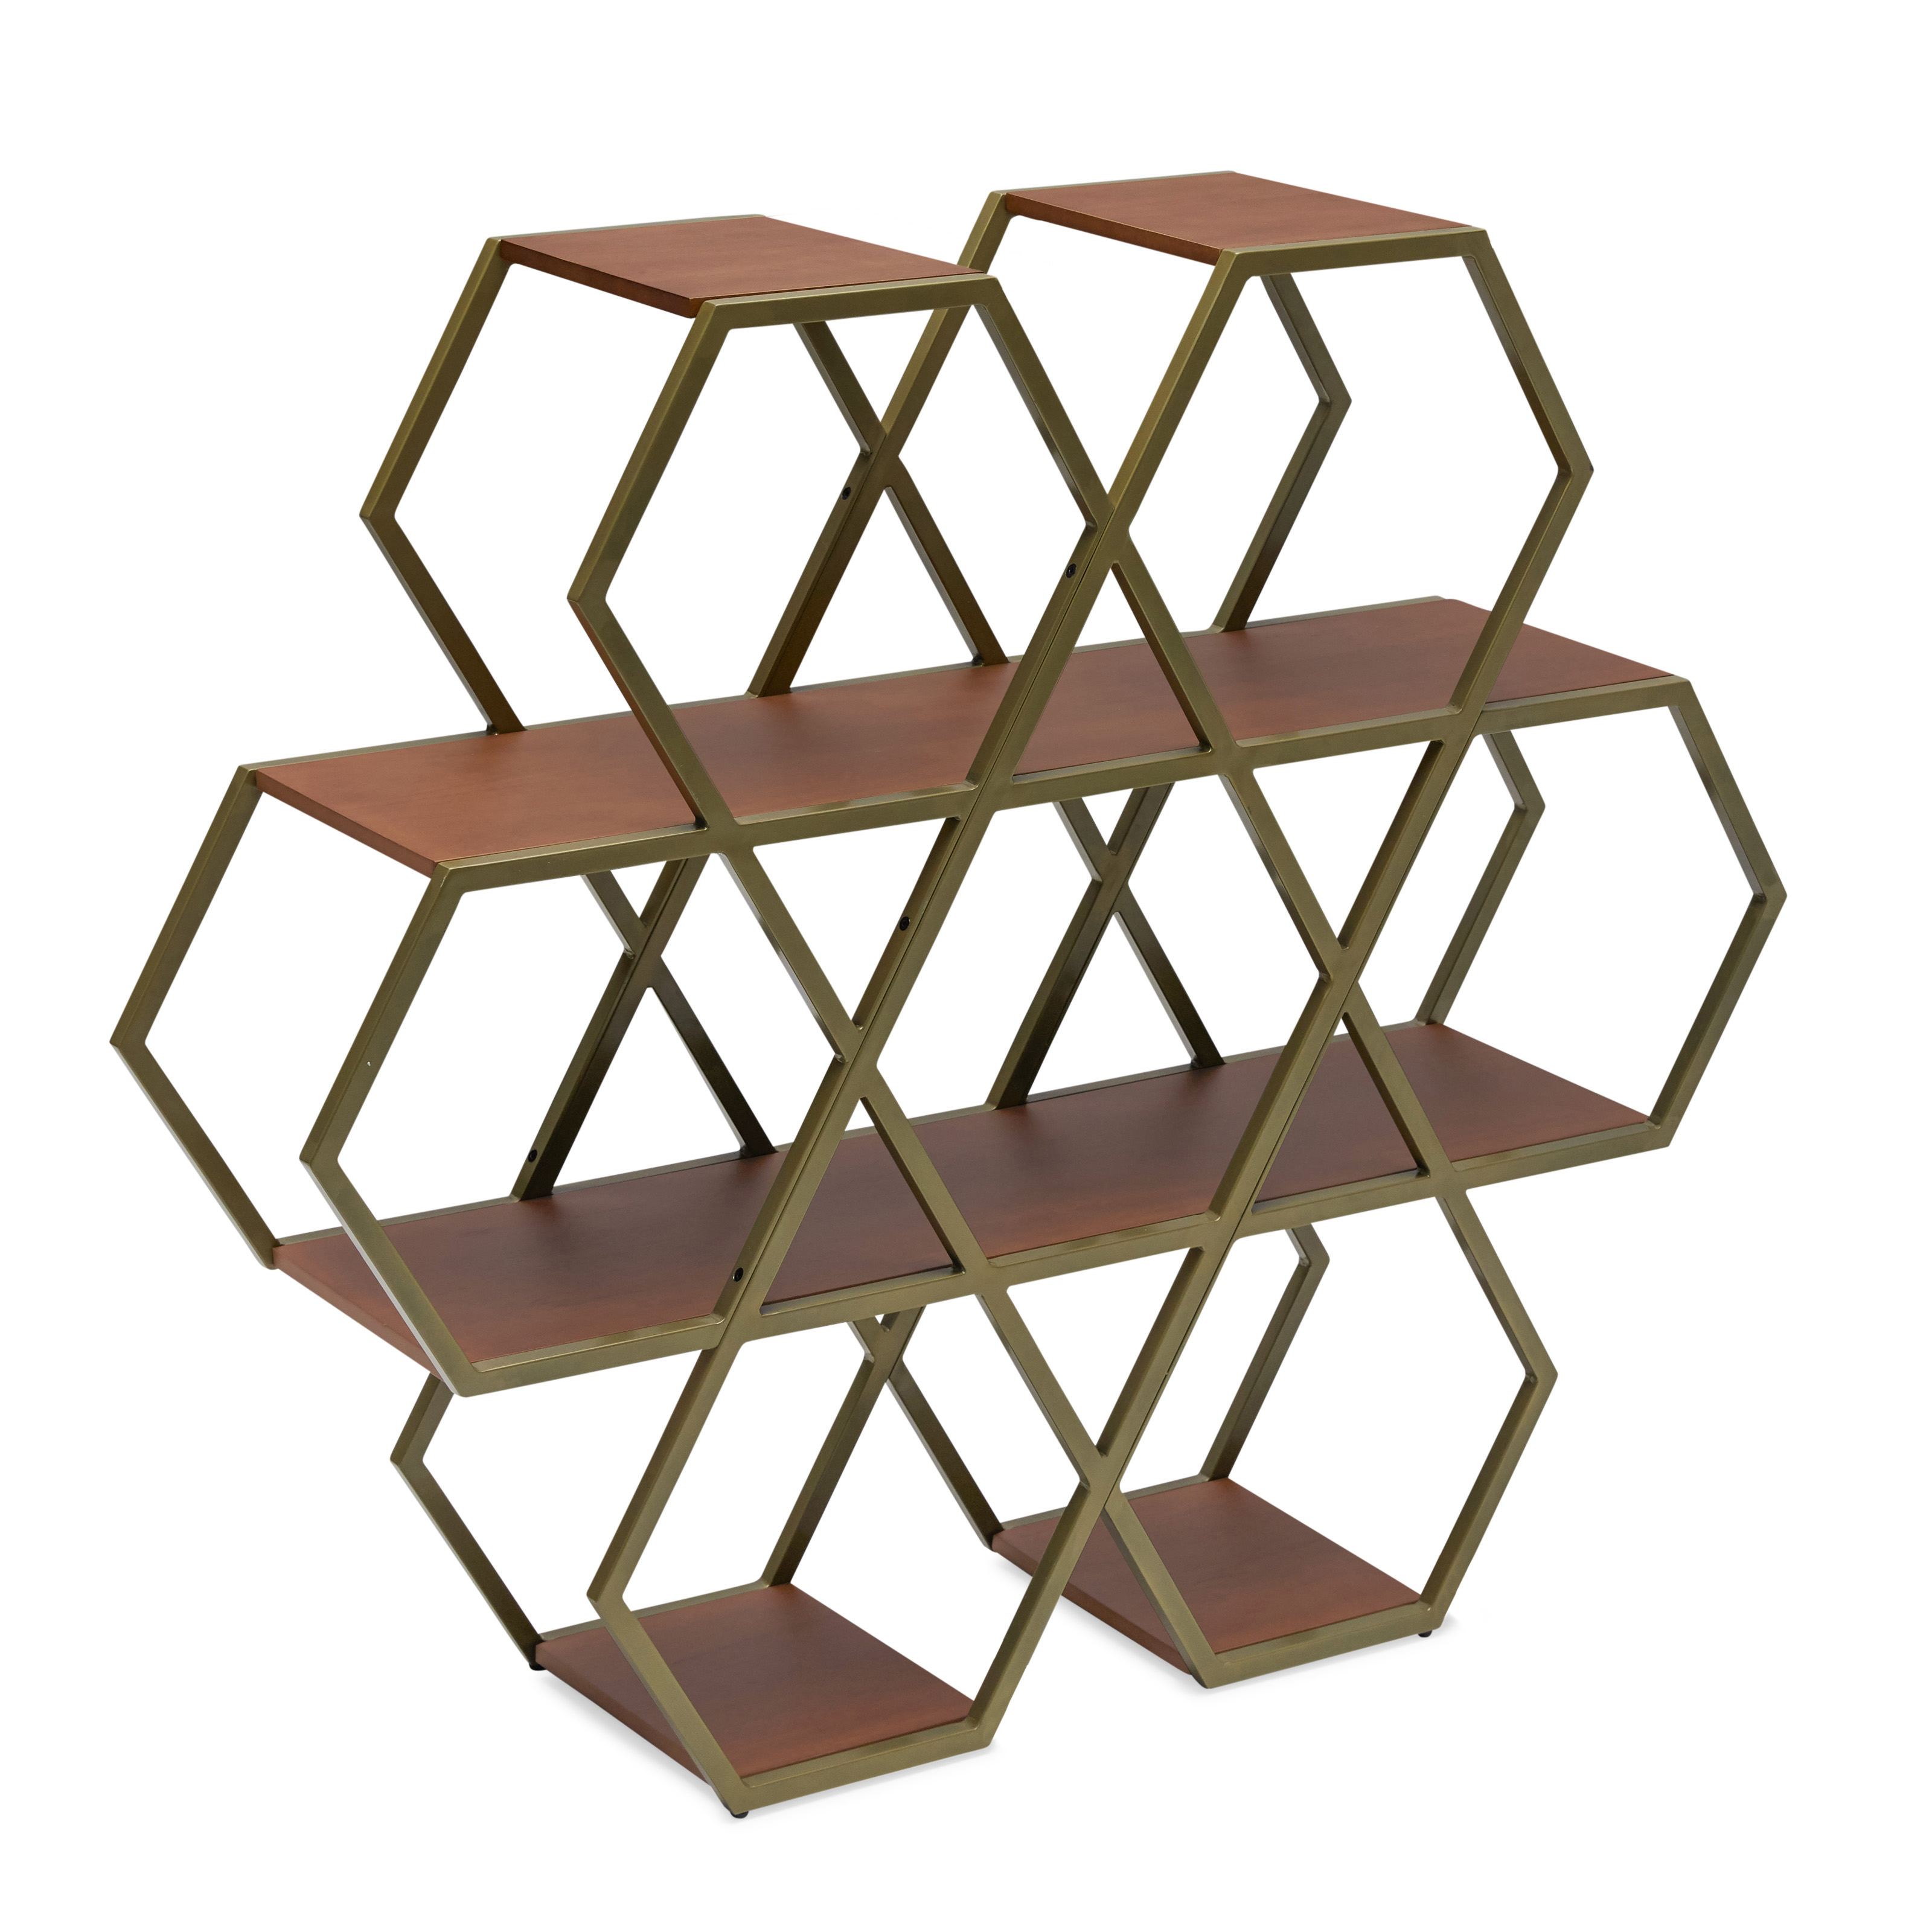 Hexagon Large Bookshelf by Drew Barrymore Flower Home - image 1 of 10